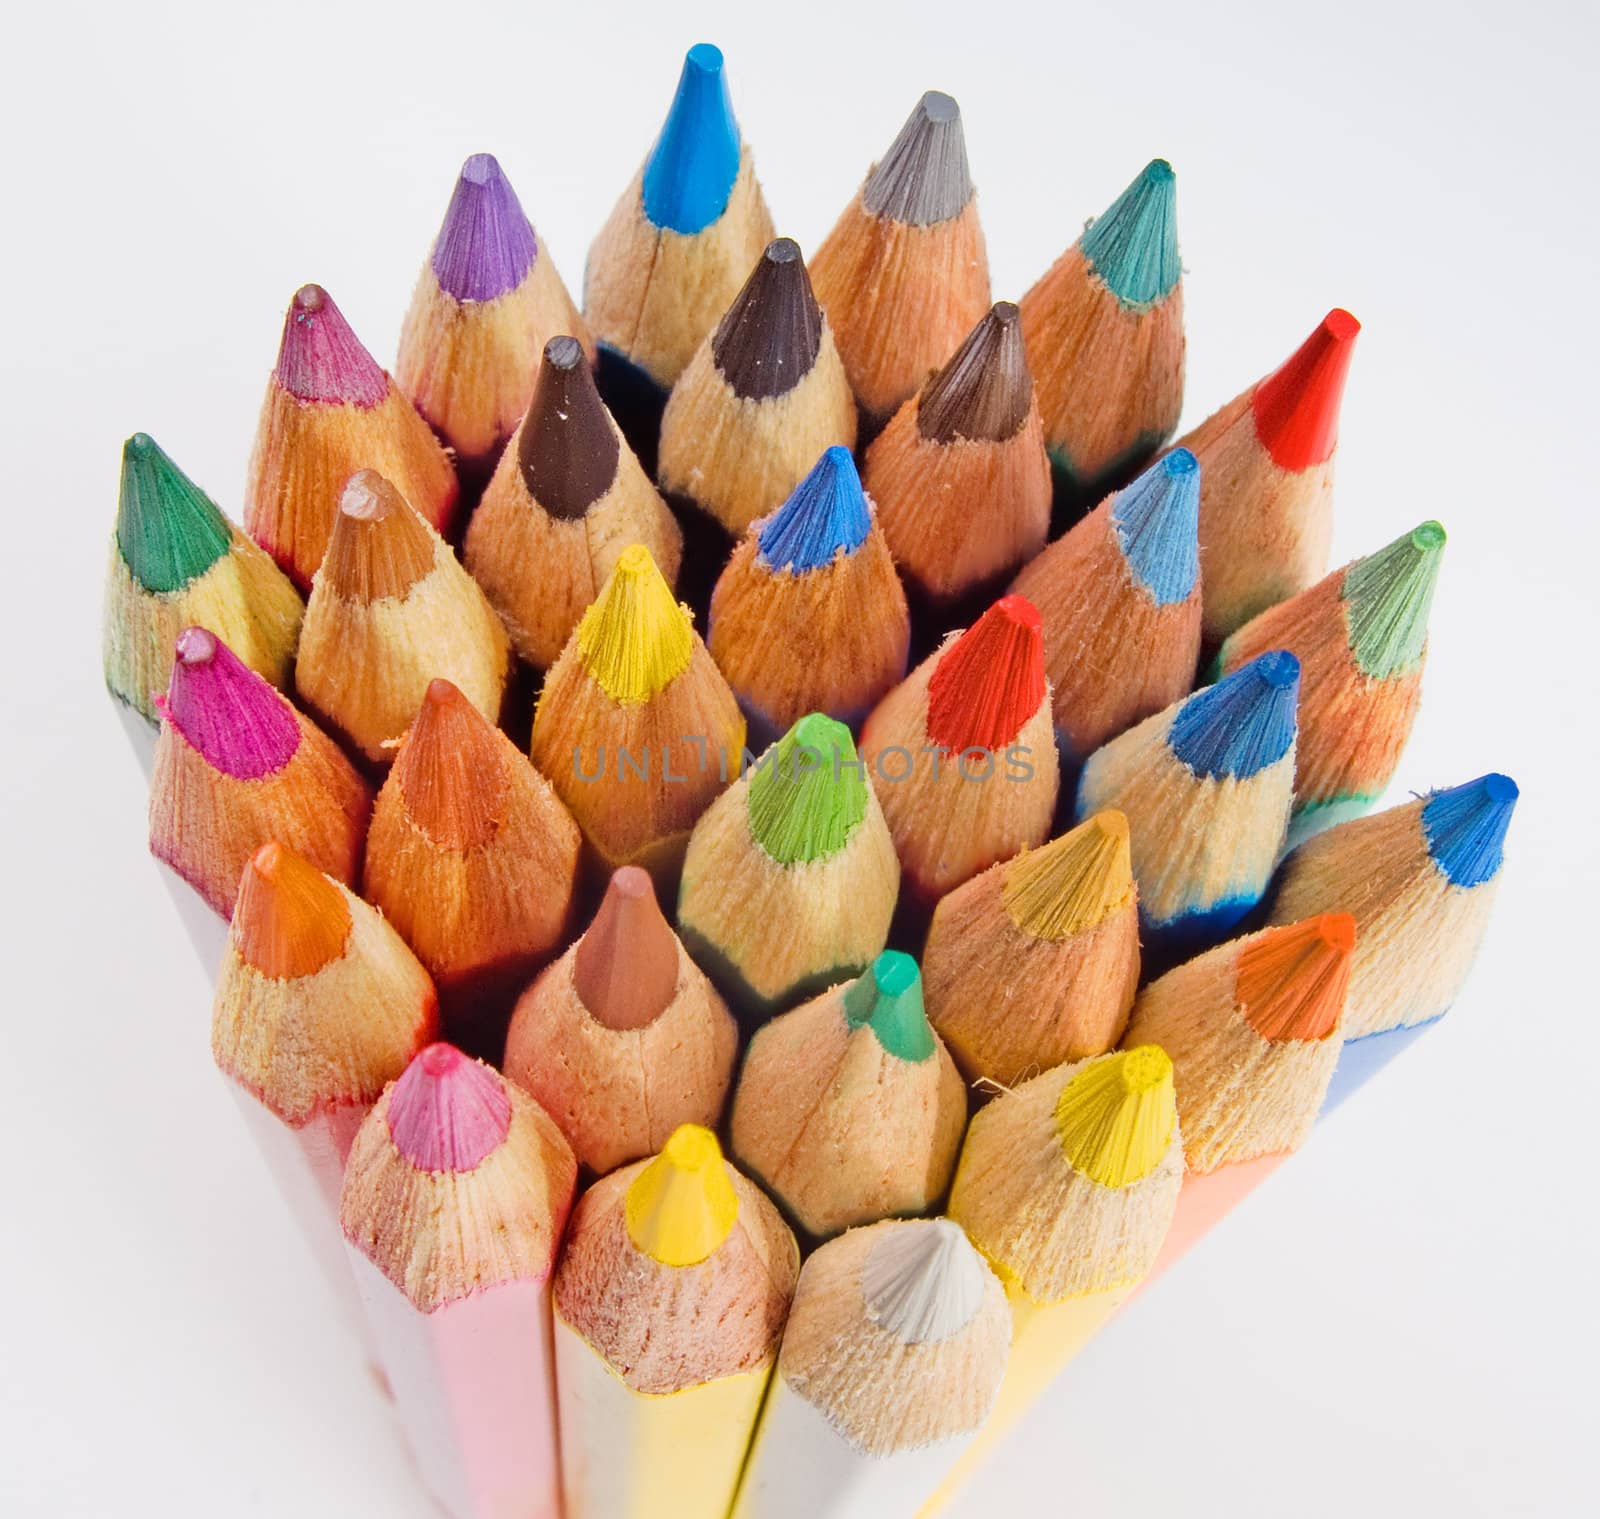 Group of colored pencils on the white background